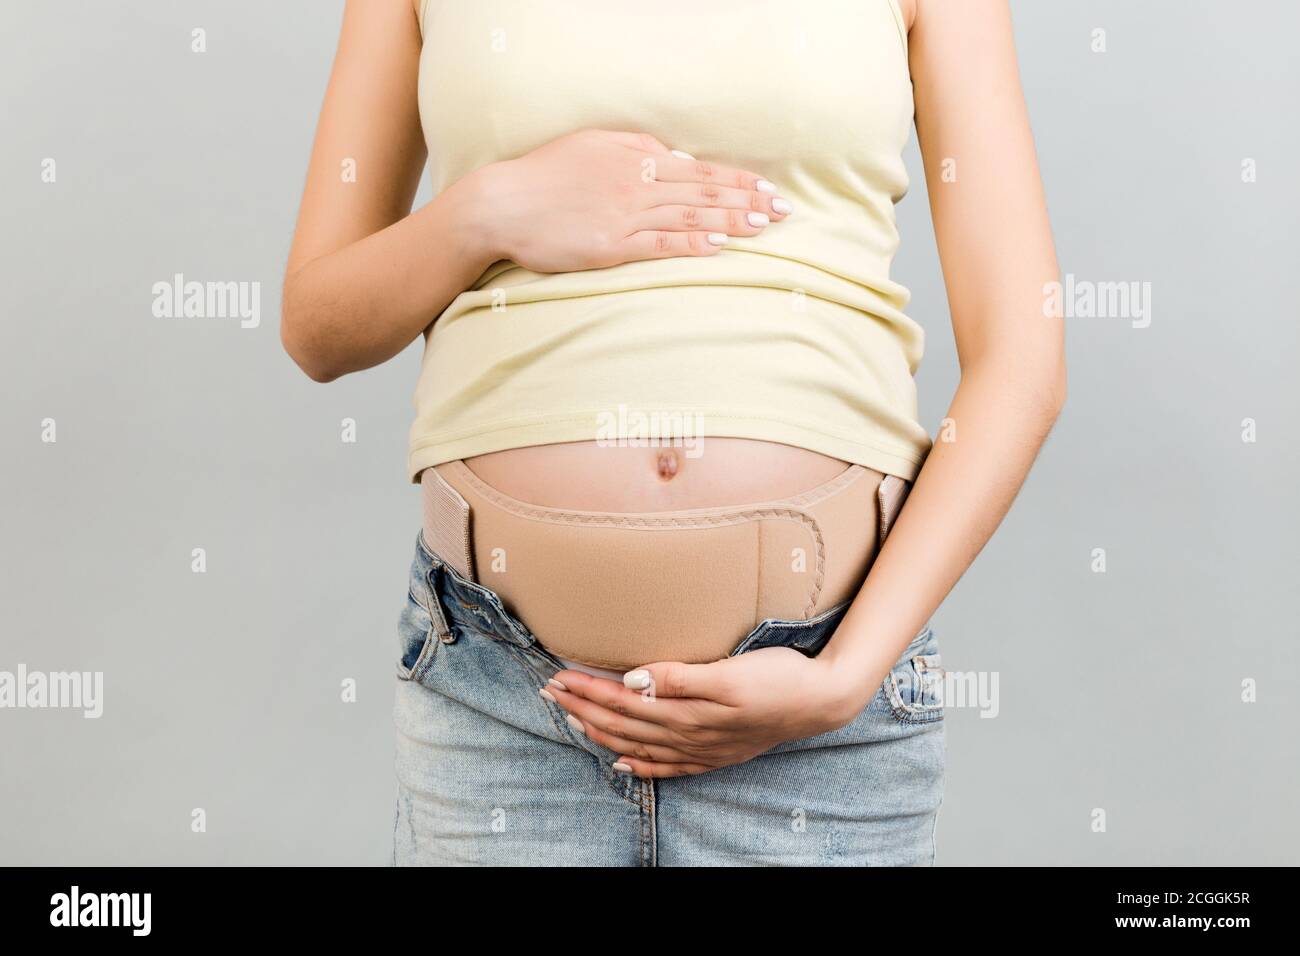 Close up of pregnant woman wearing pregnancy corset against